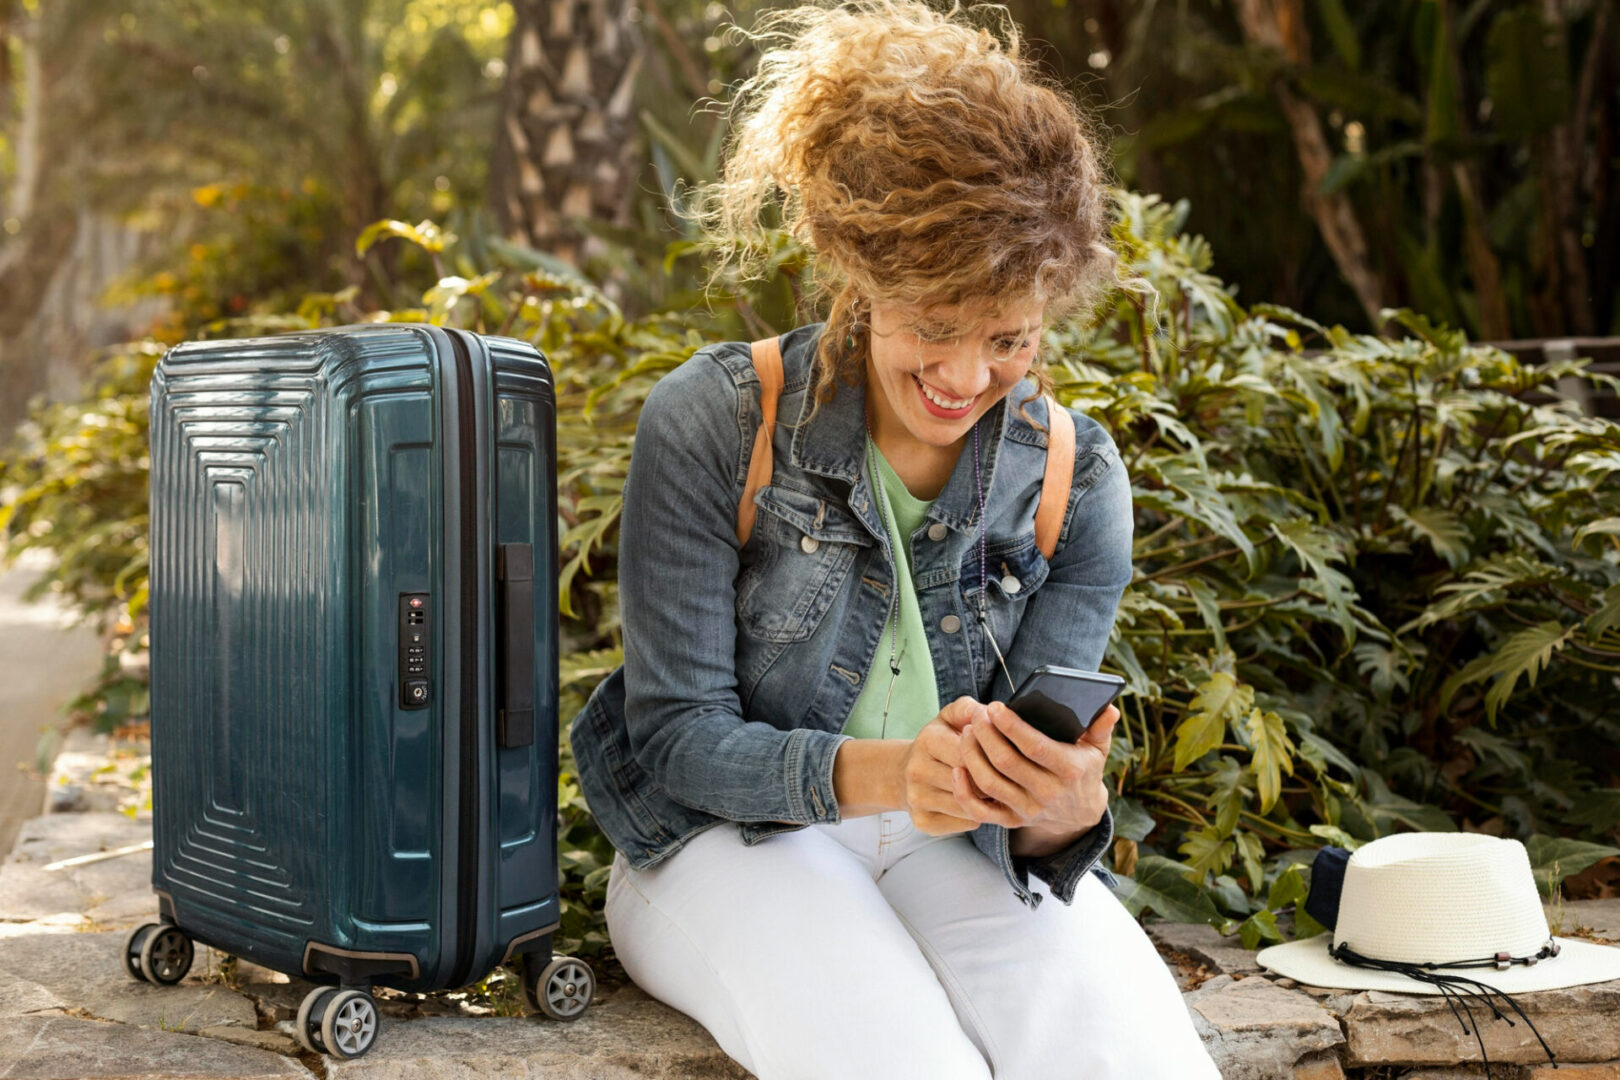 A woman sitting on the ground with her luggage looking at her phone.